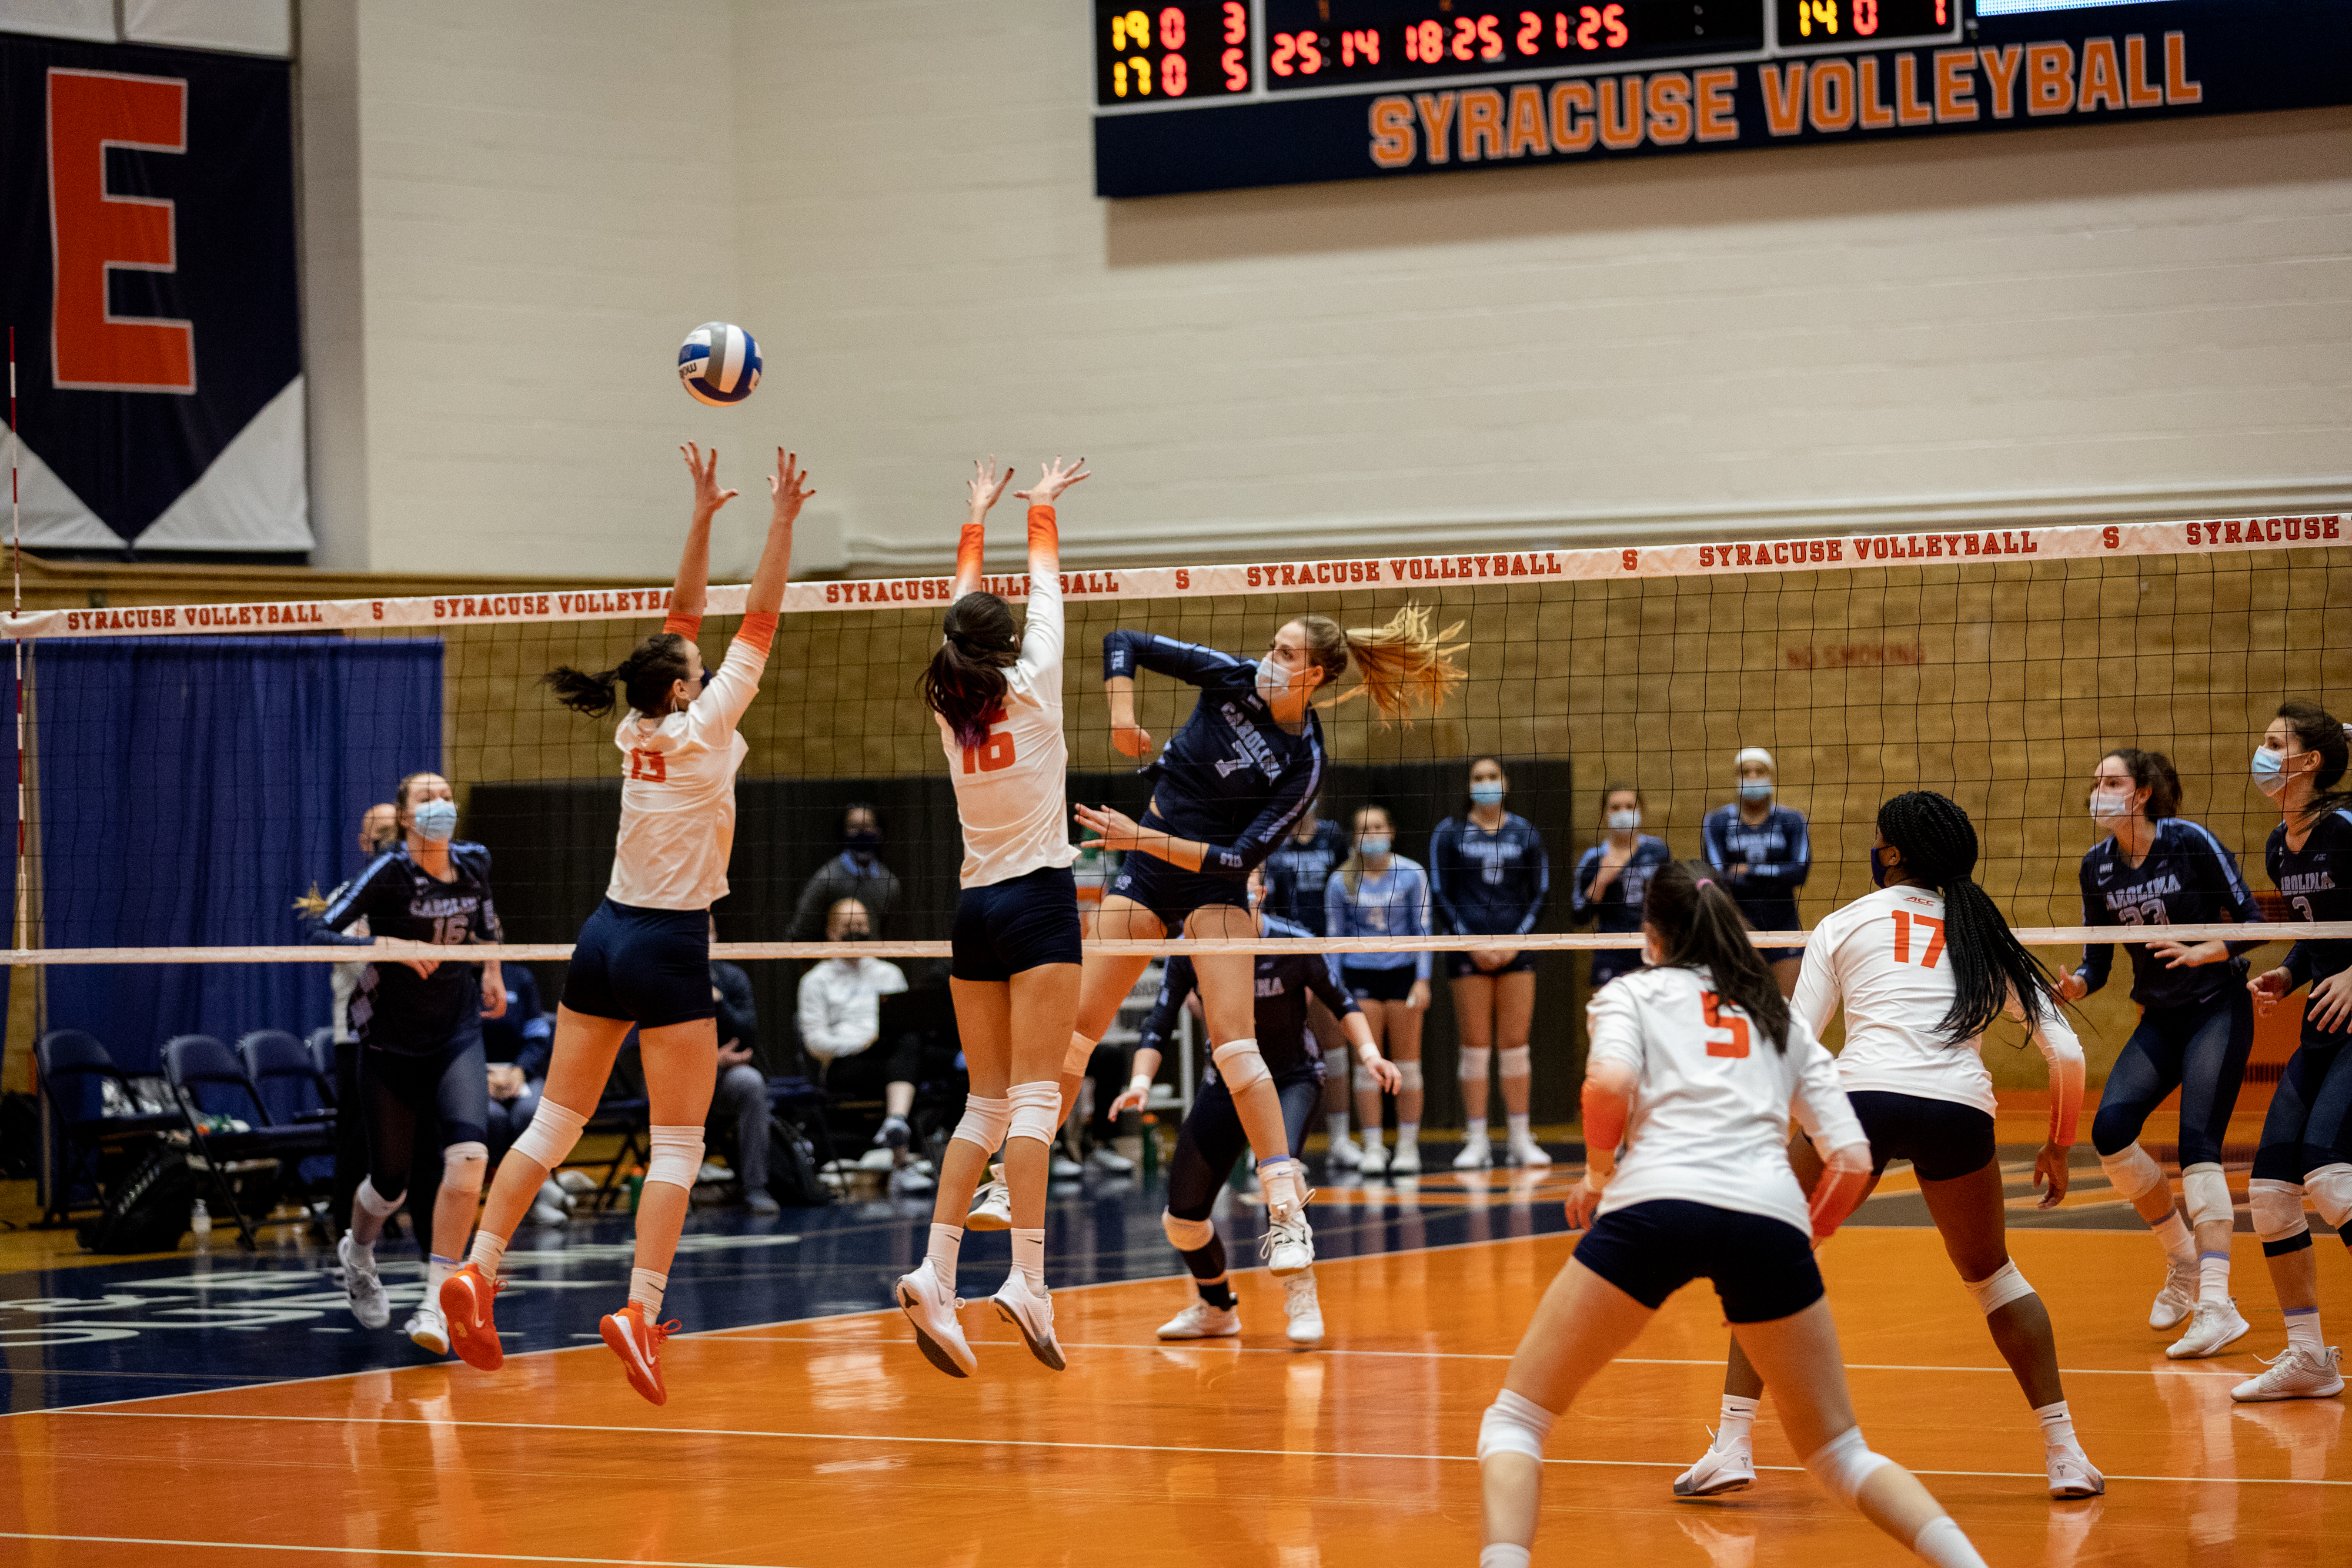 SU's Yuliia Yastrub (13) and Abby Casiano (16) block a spike during the March 5, 2021 game against UNC in the Women's Building in Syracuse, NY.